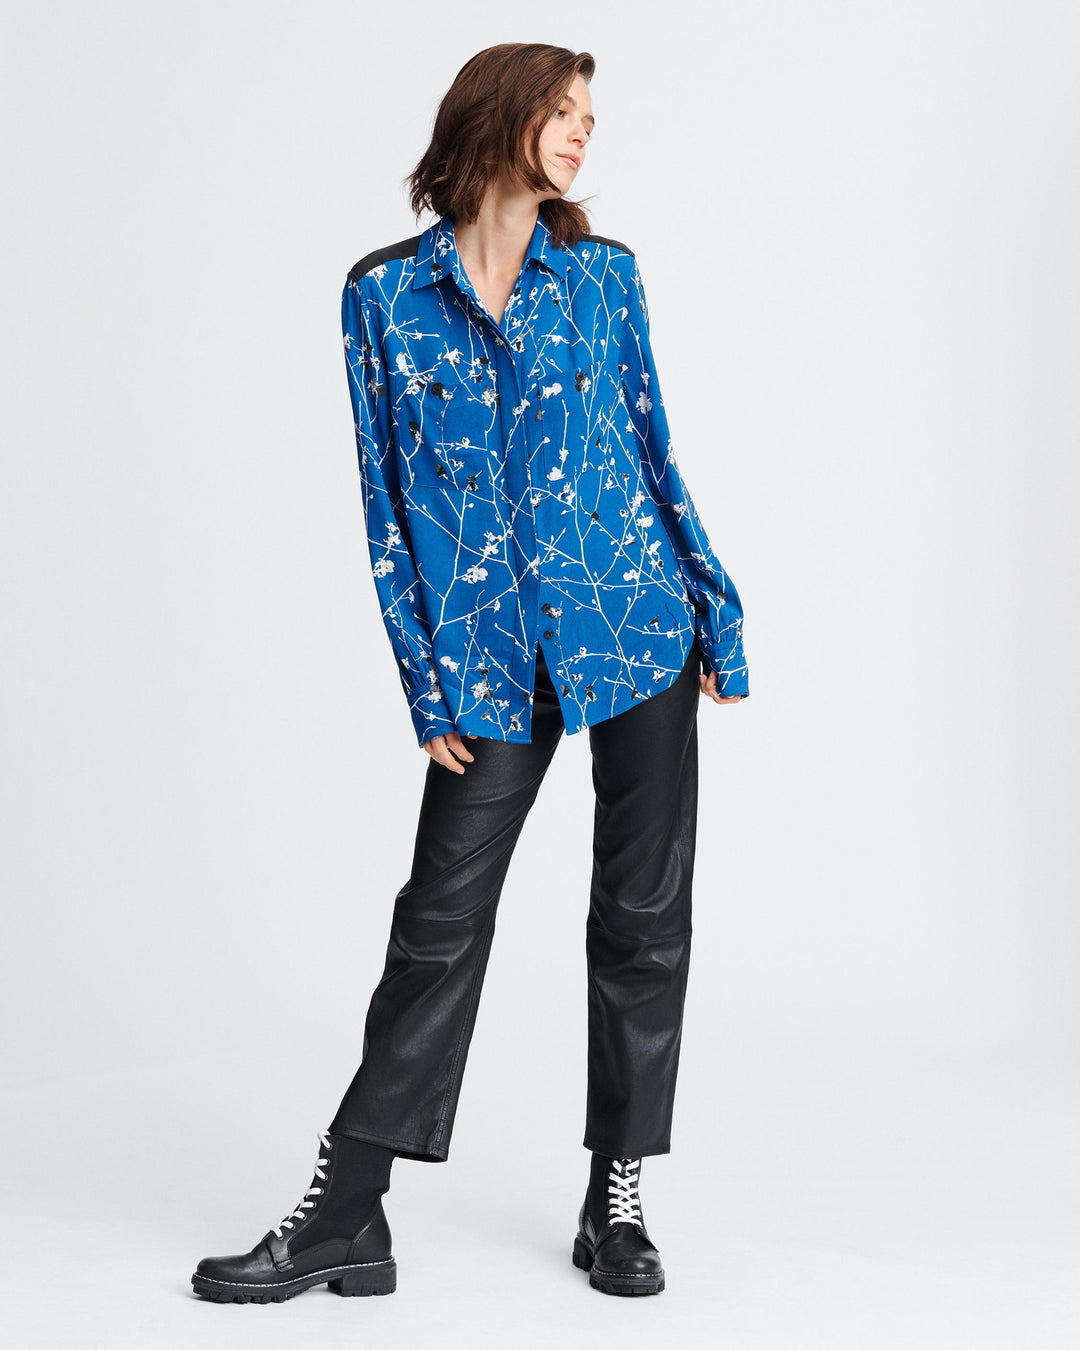 Rag & Bone Collection - Therese Blouse in Blue Multi